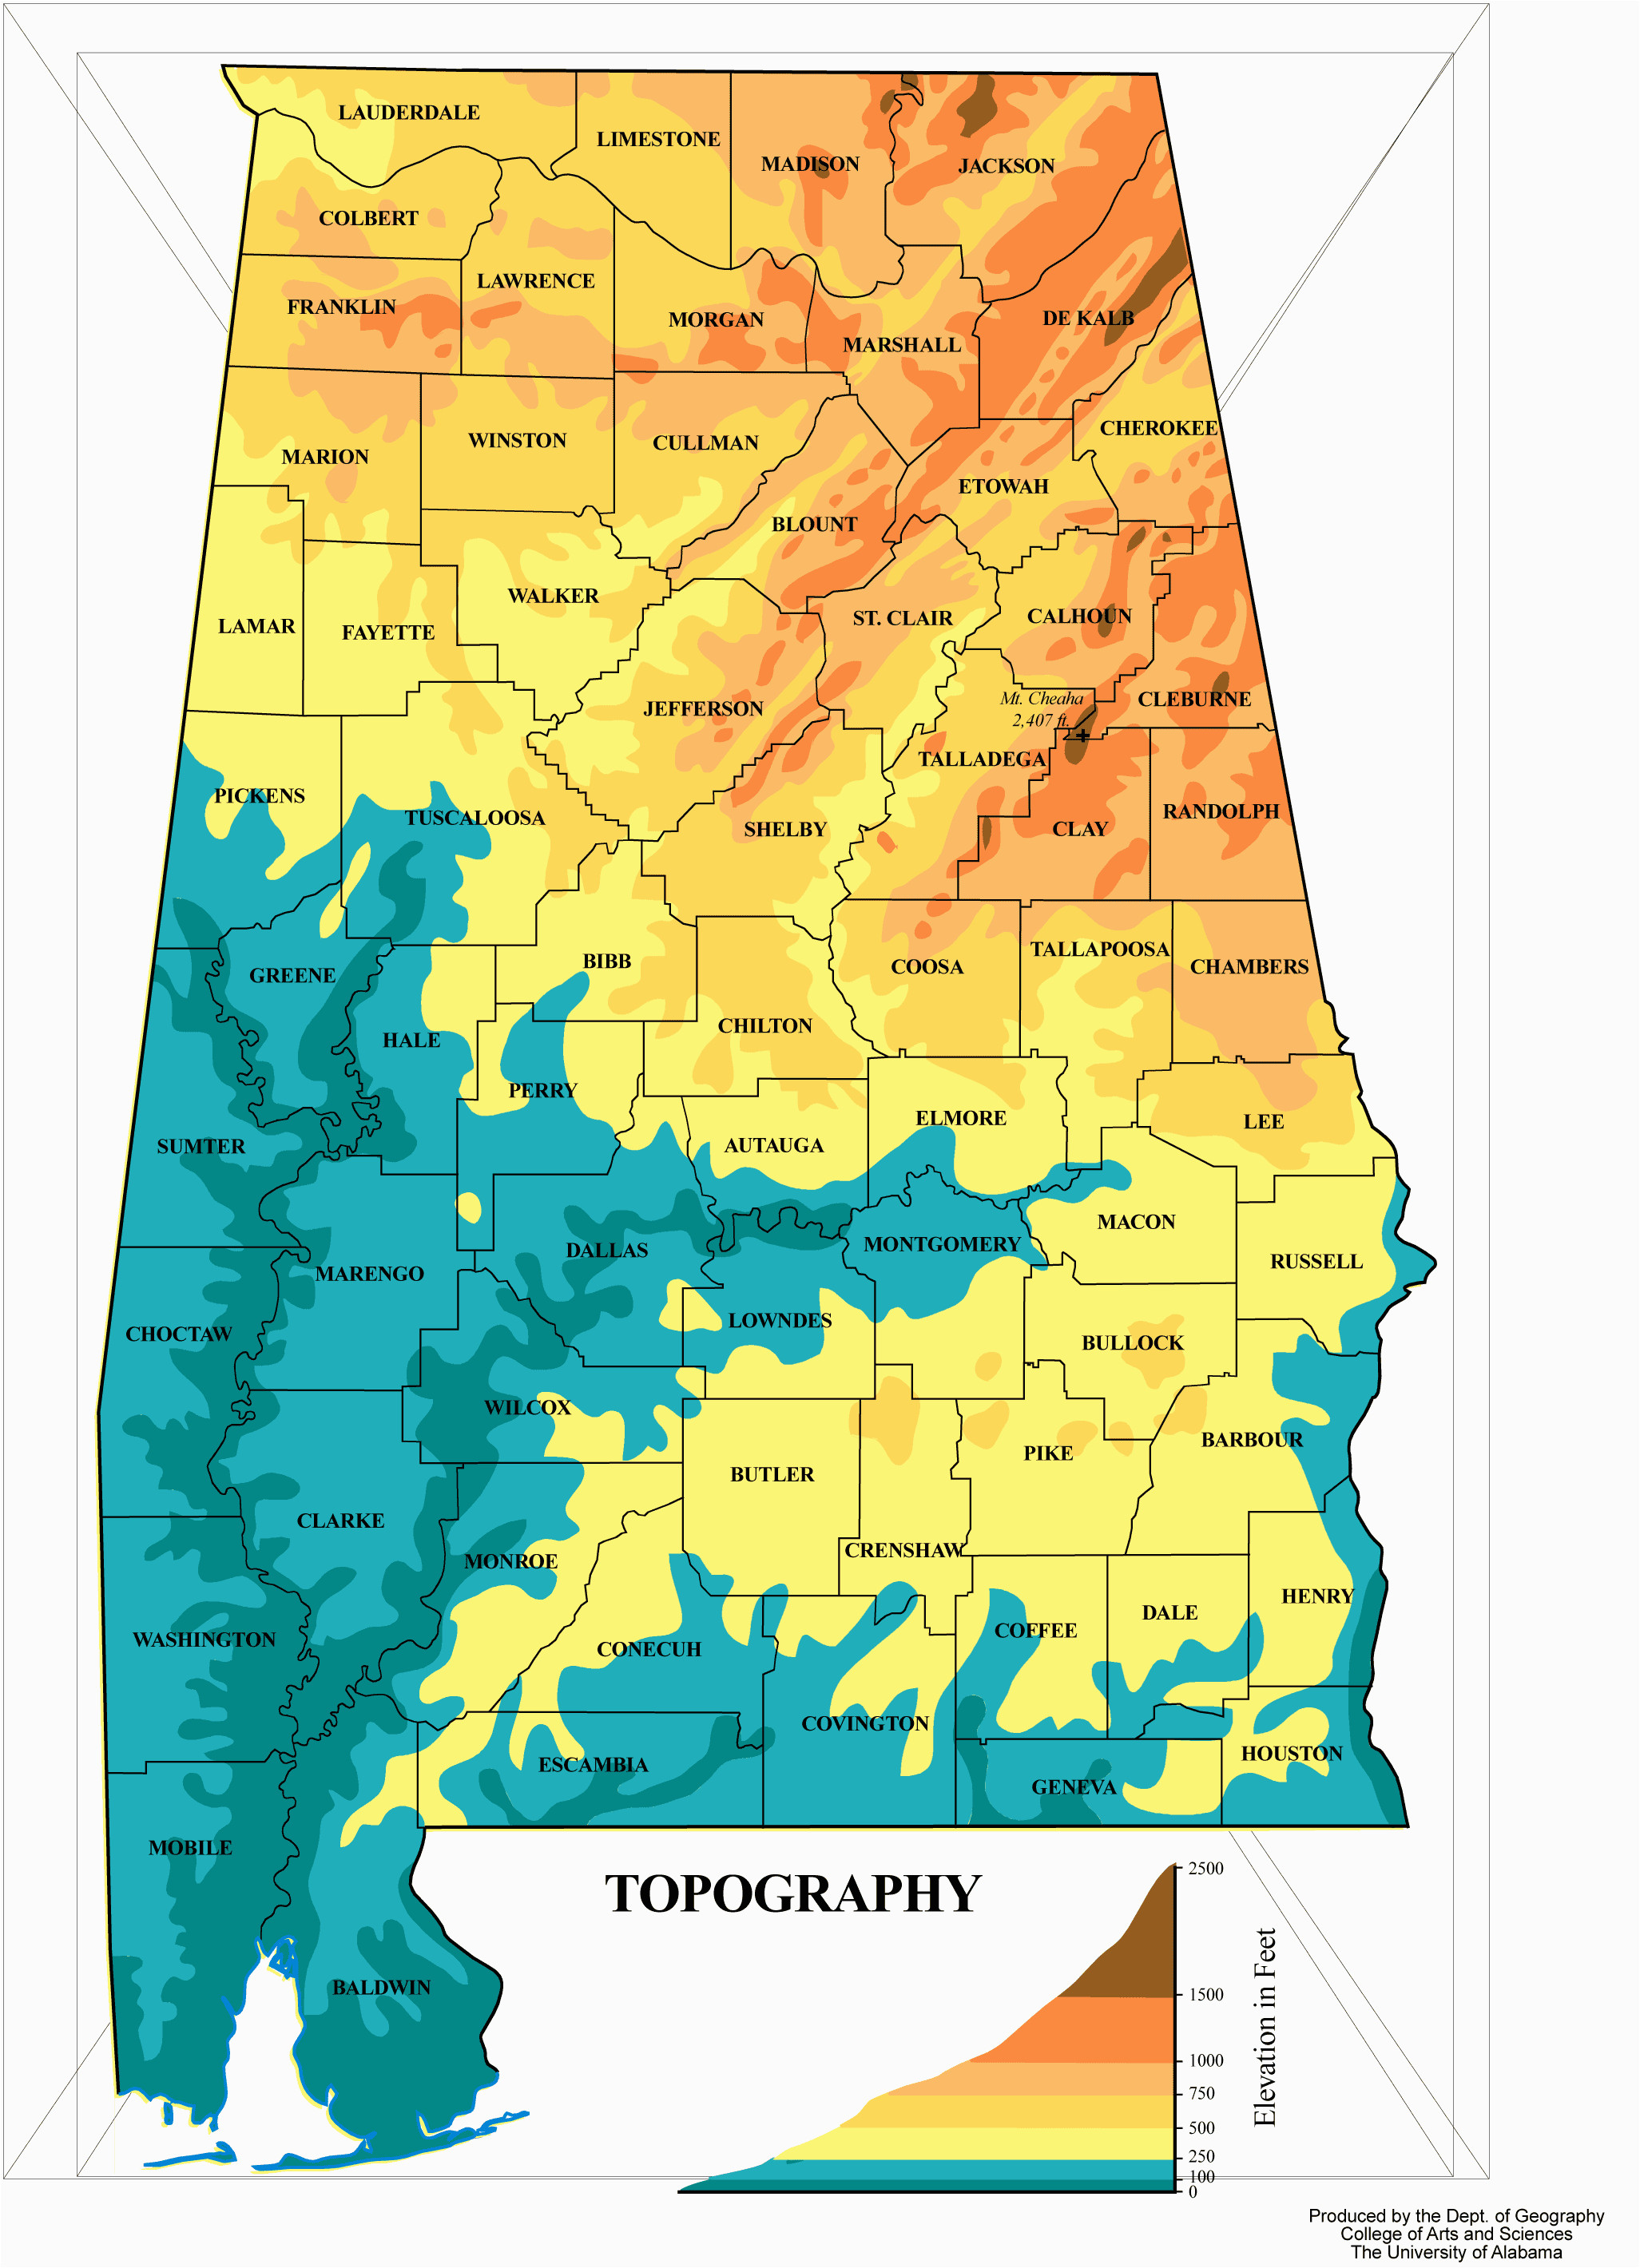 Topo Map Of Alabama River Alabama topographic Map Words and Pictures Pinterest Alabama